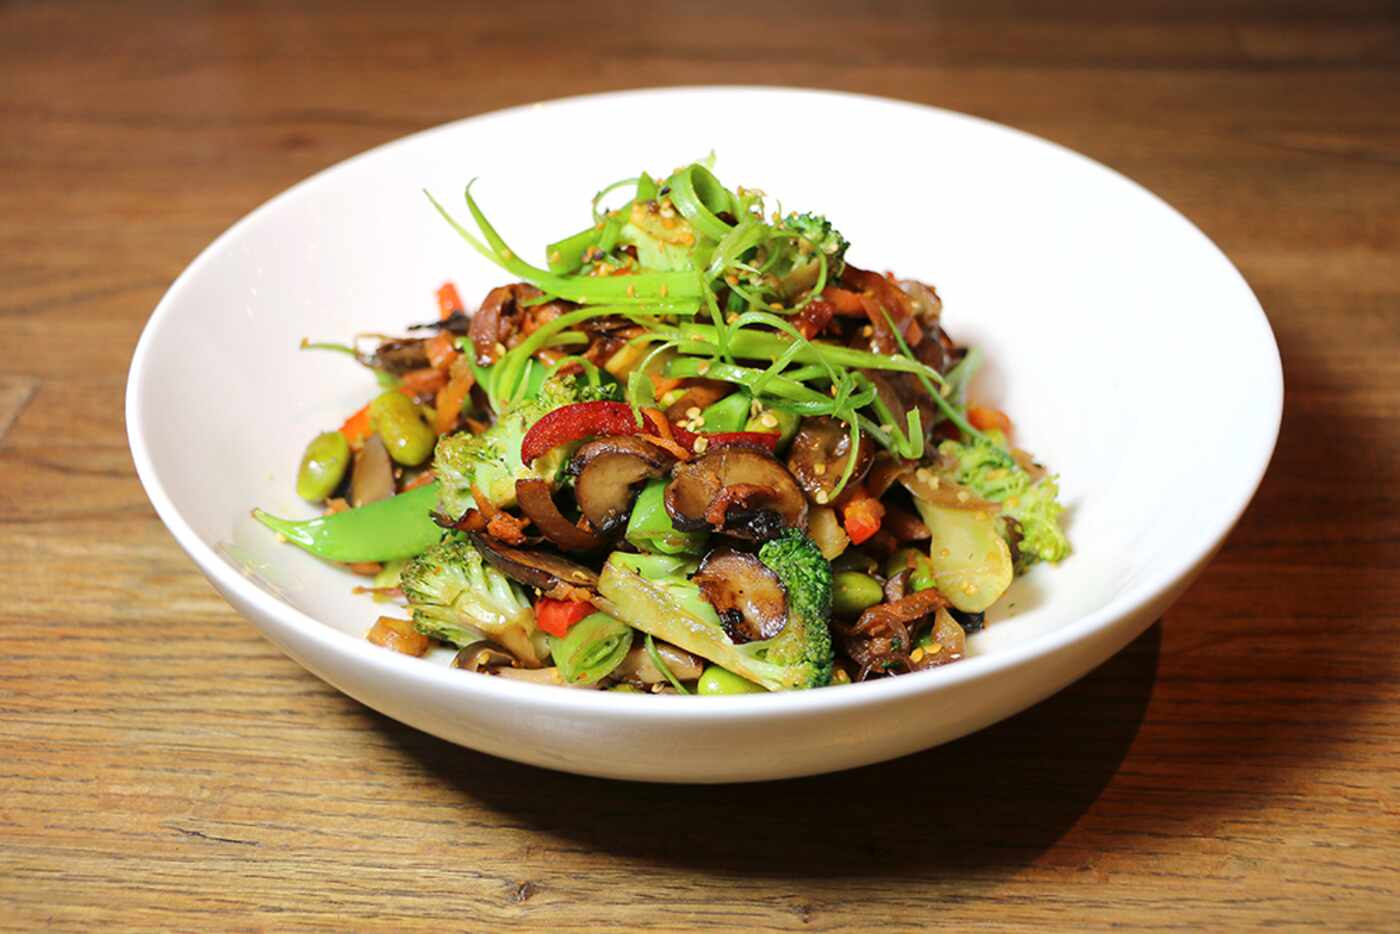 The Stir Fry -- broccoli, mushrooms, snap peas, red bell peppers, carrots, edamame & red...